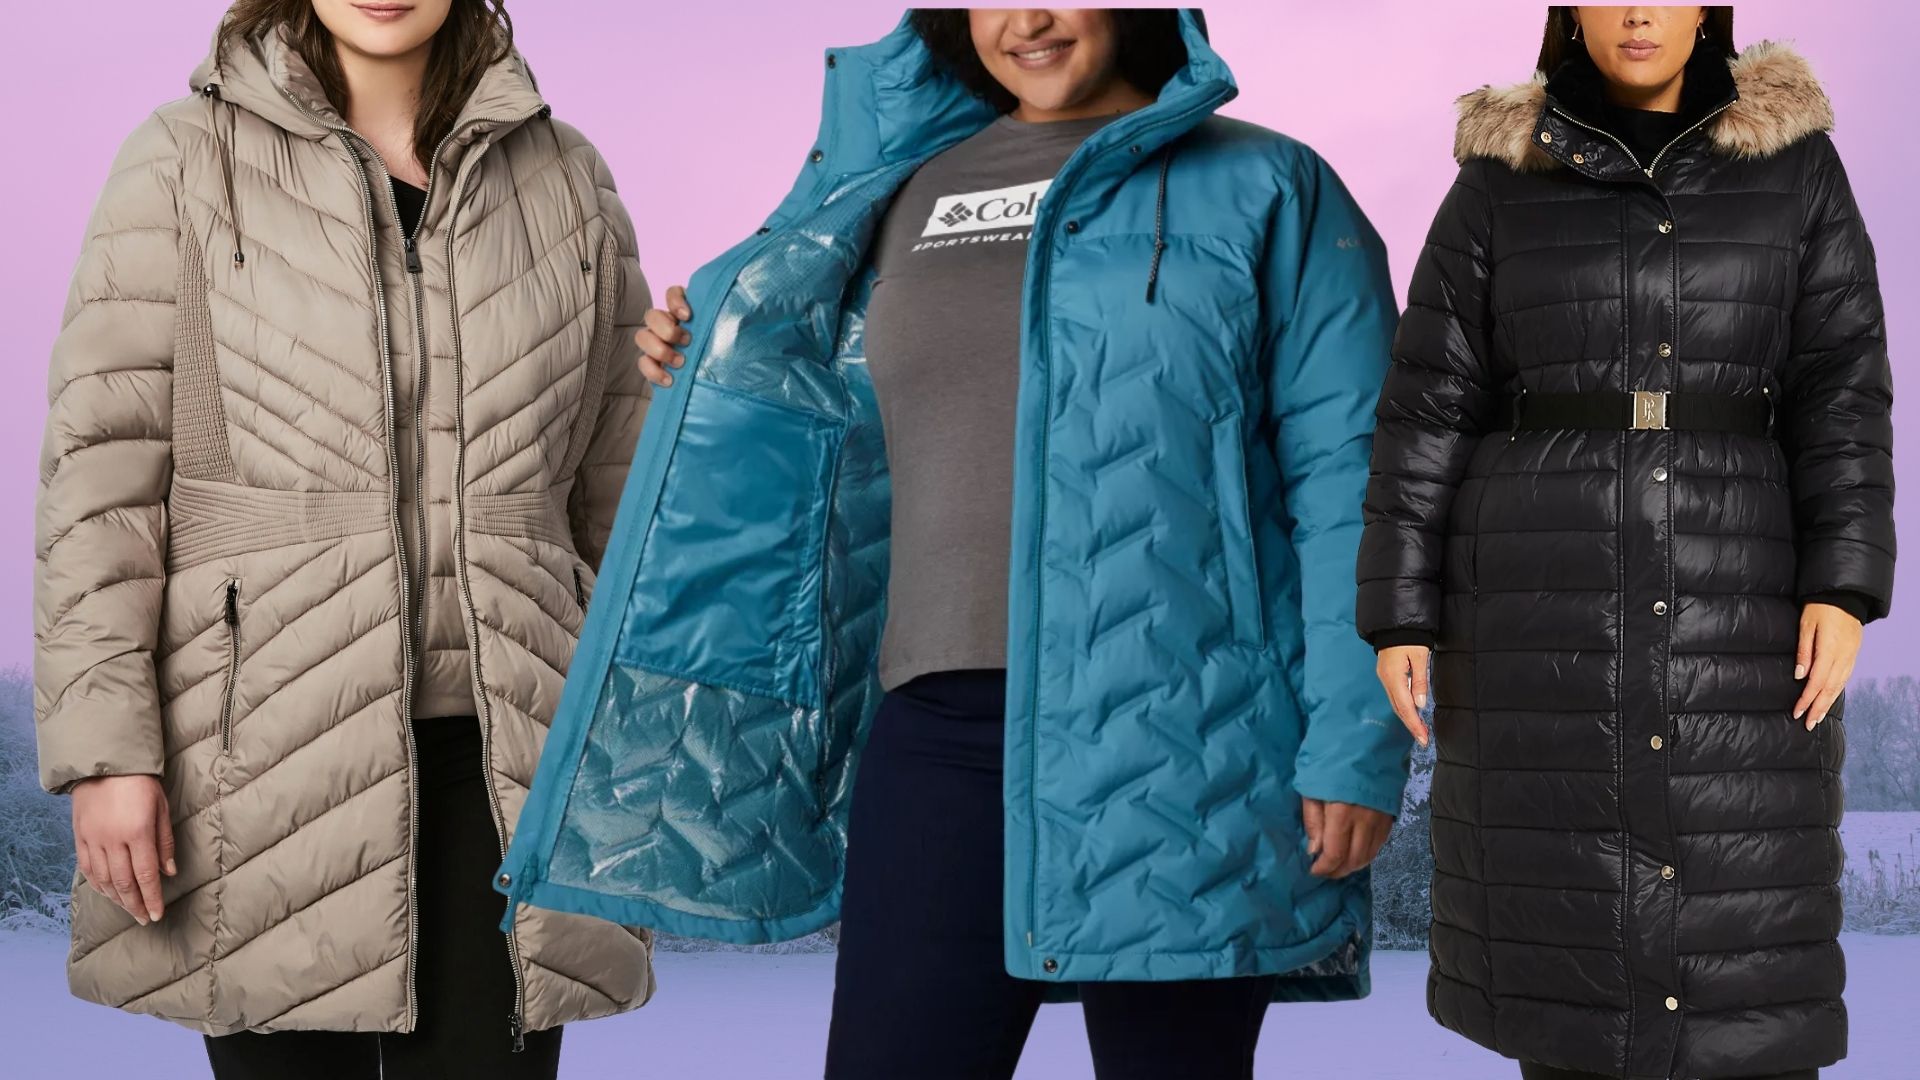 How to Make Your Puffer Jacket Look Classy